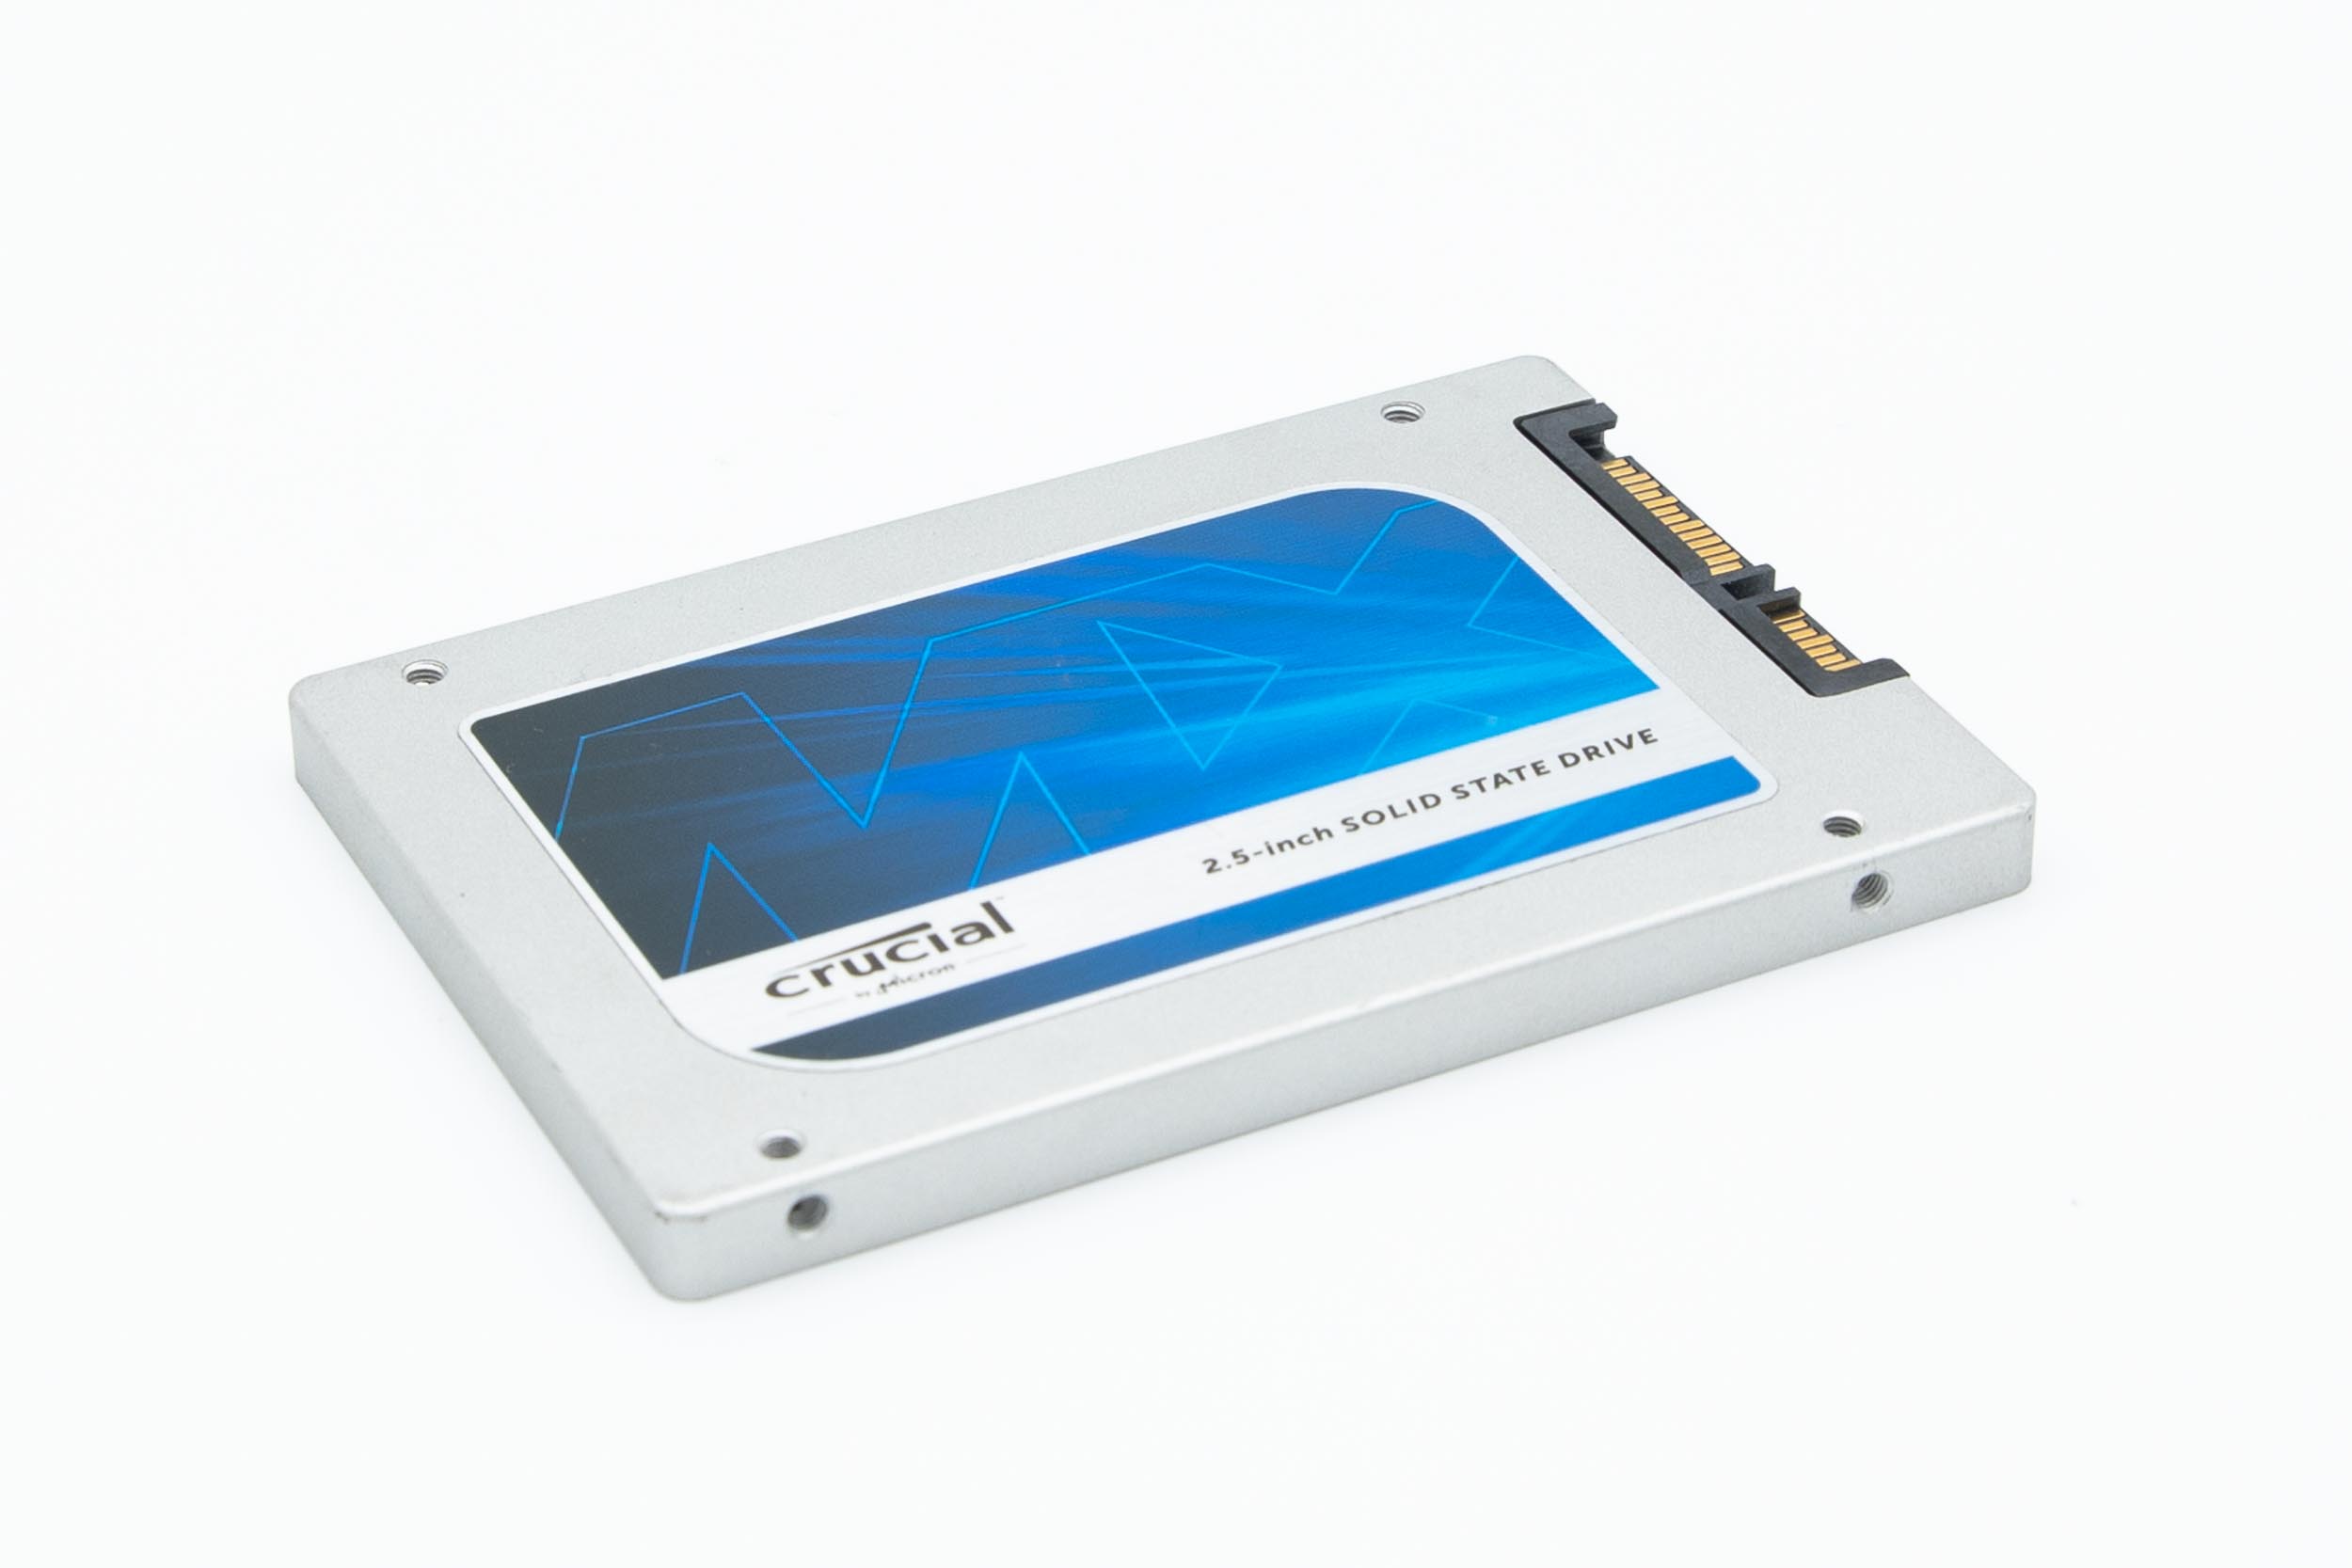 Crucial SSD Recovery: How to Recover Data From Crucial Solid-State Drives